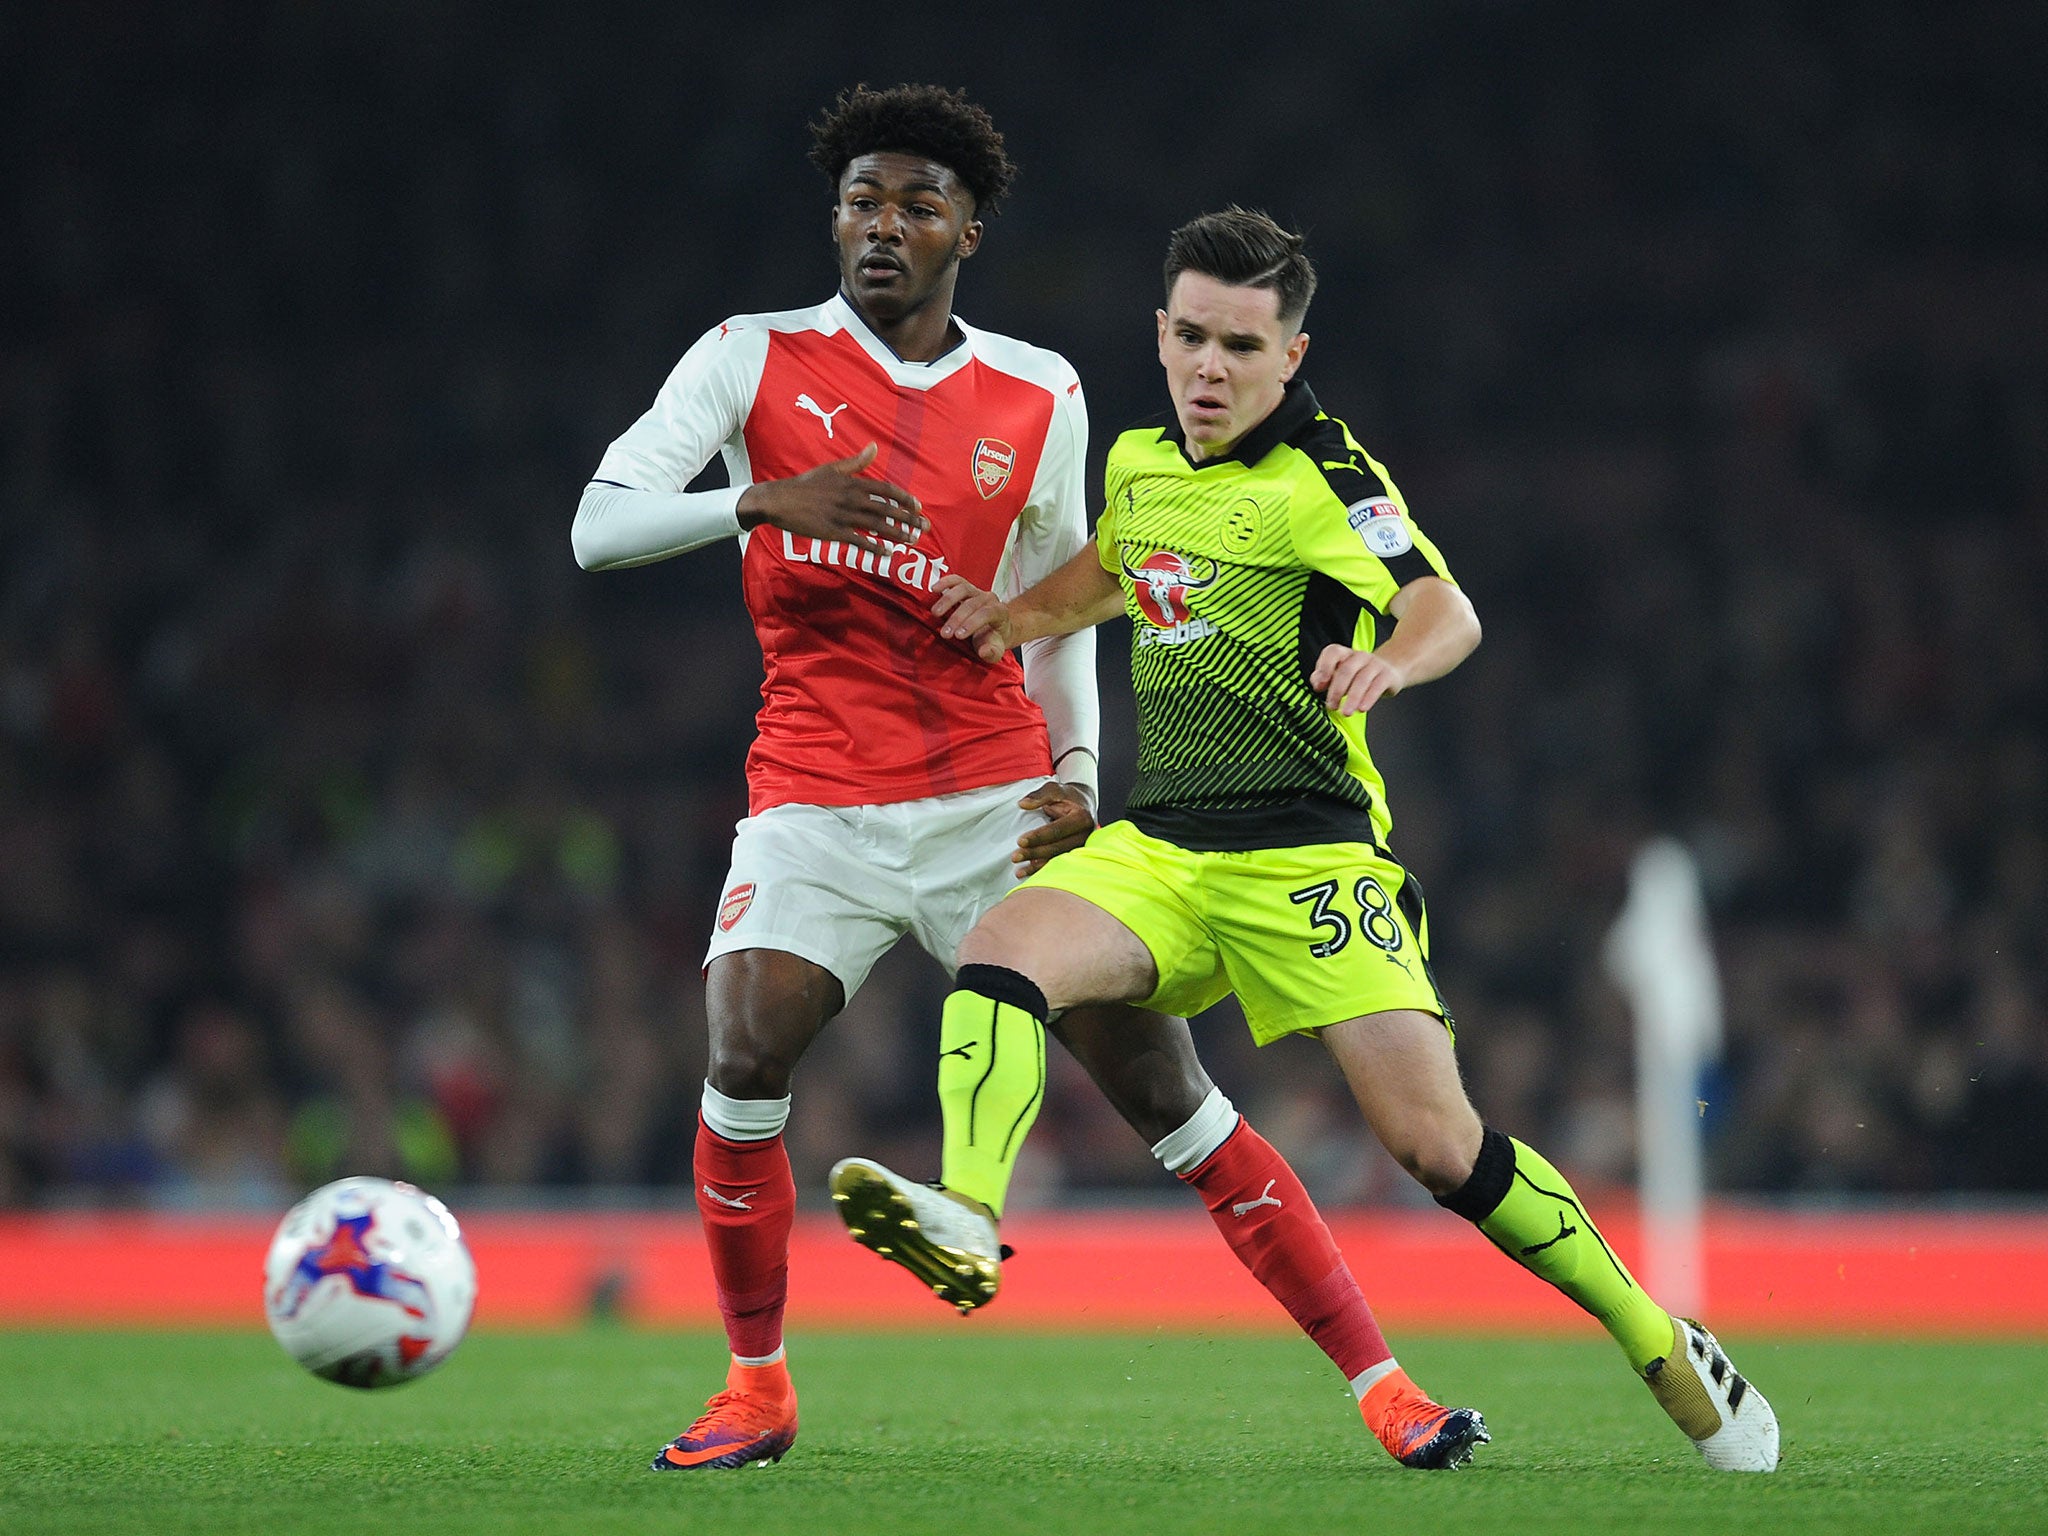 Arsenal's Ainsley Maitland-Niles and Reading's Liam Kelly clash for possession